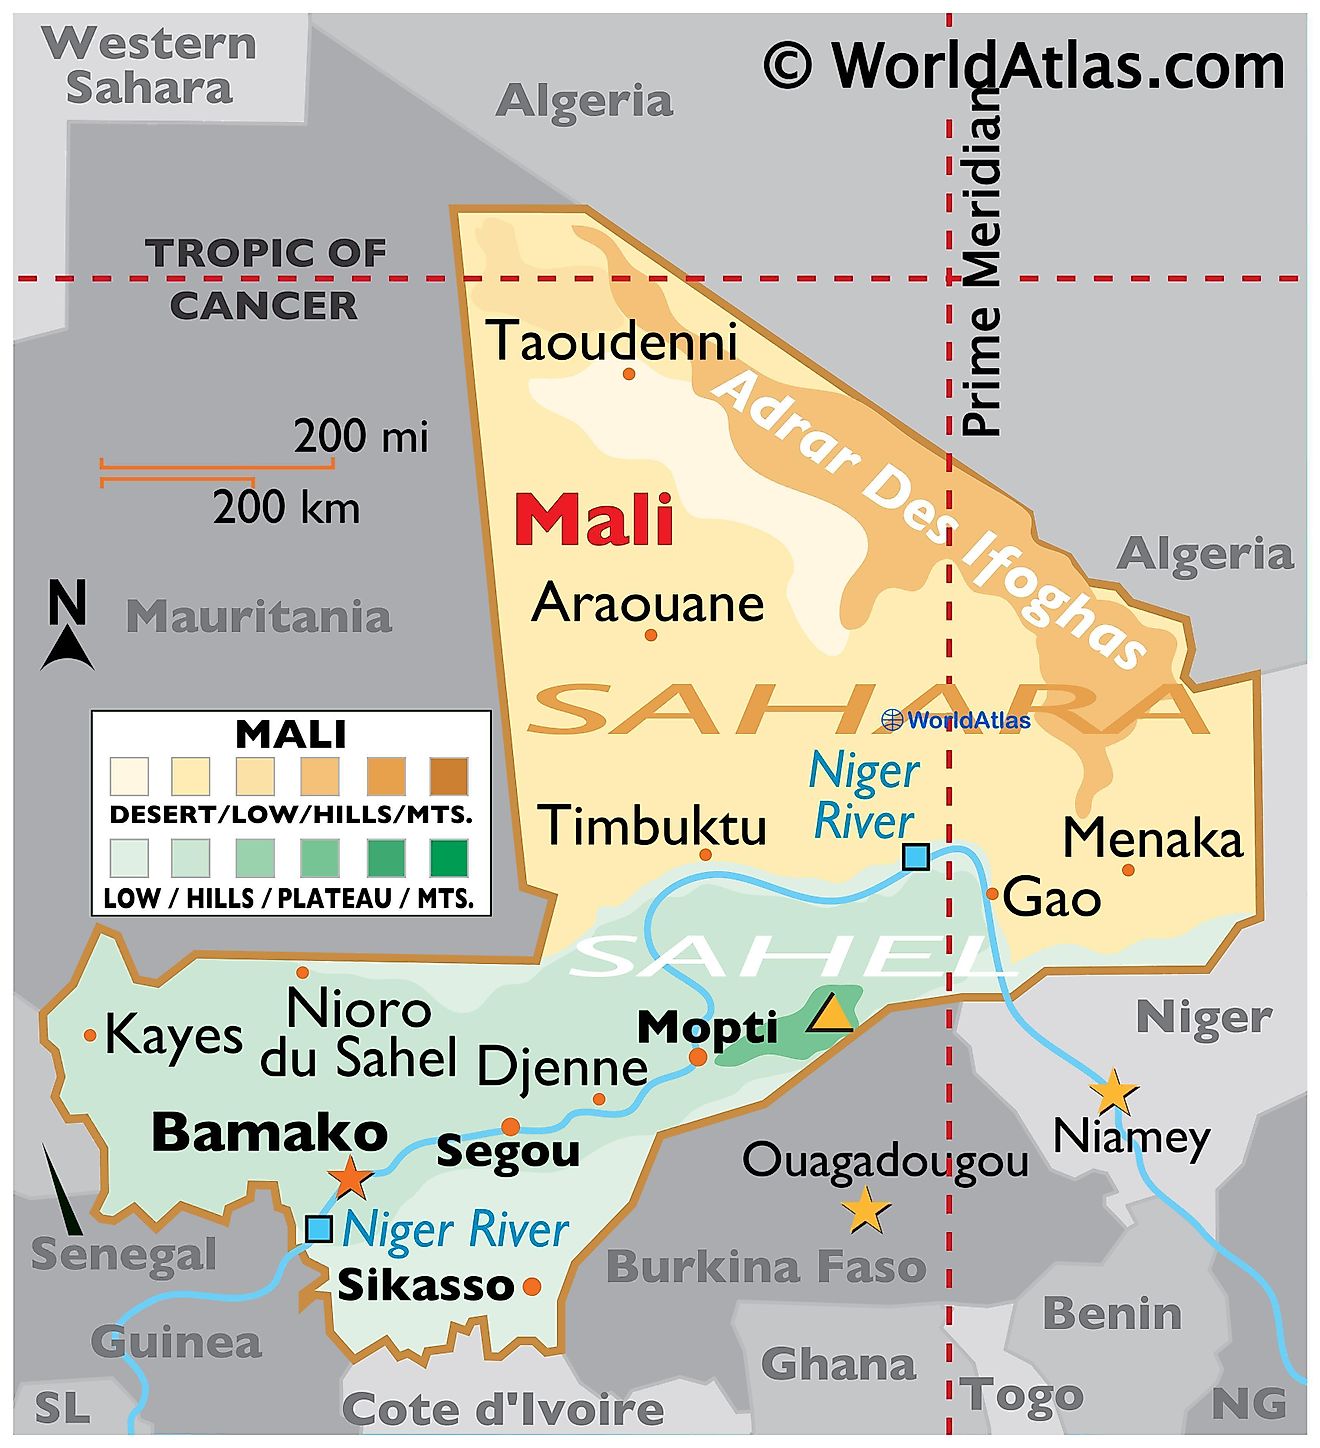 Physical map of Mali with country borders, major rivers, deserts, highest peak, important cities and more.